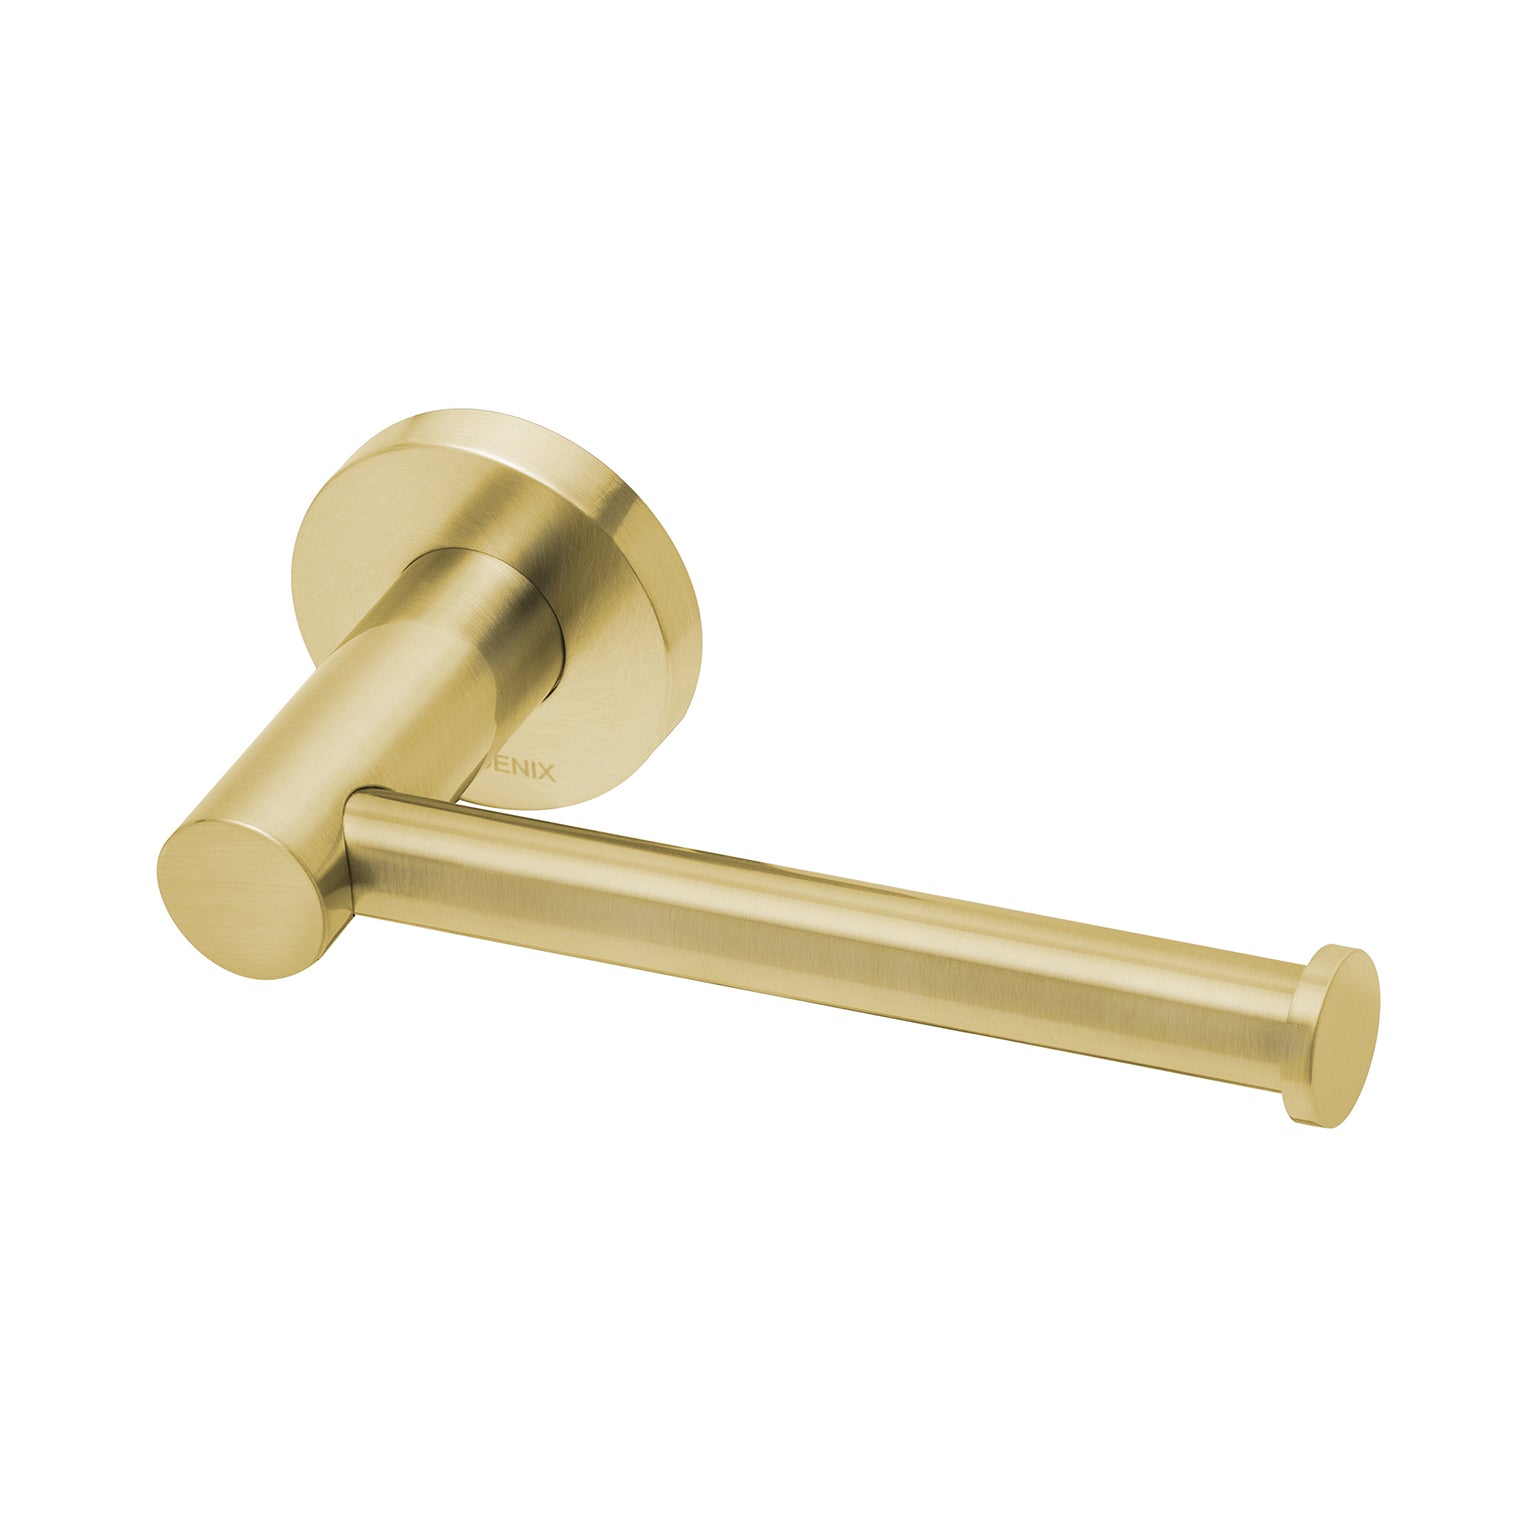 PHOENIX RADII TOILET ROLL HOLDER ROUND PLATE BRUSHED GOLD 138MM